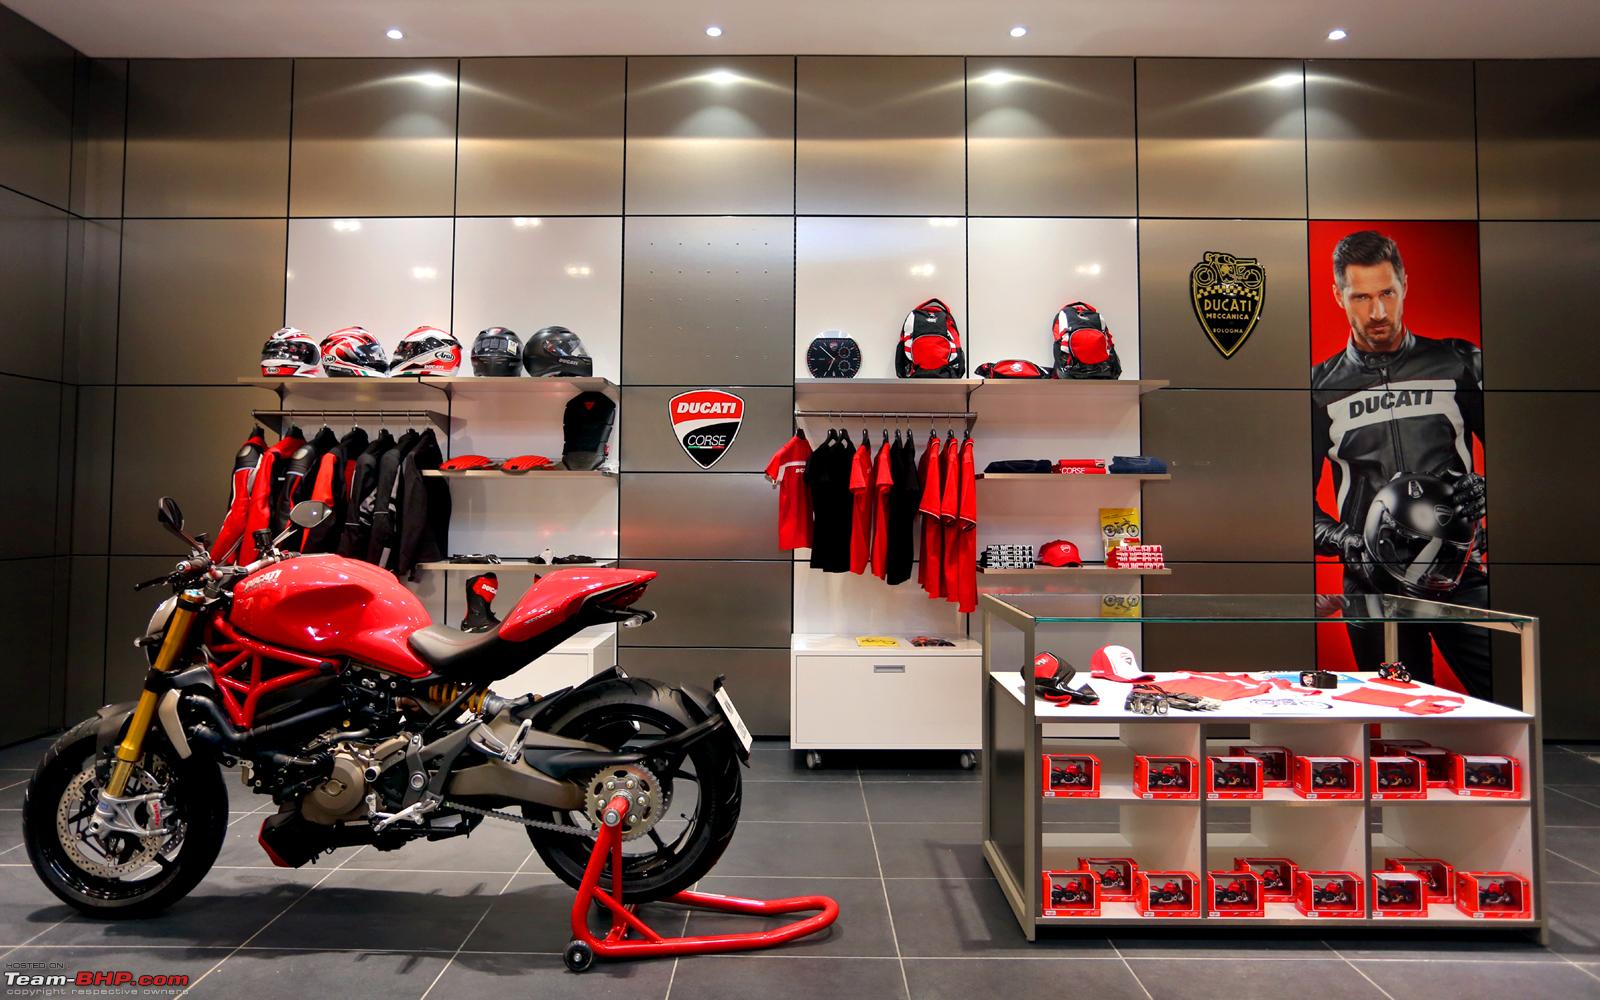 Ducati Showroom Near Me Top Sellers, UP TO 70% OFF | www.ldeventos.com